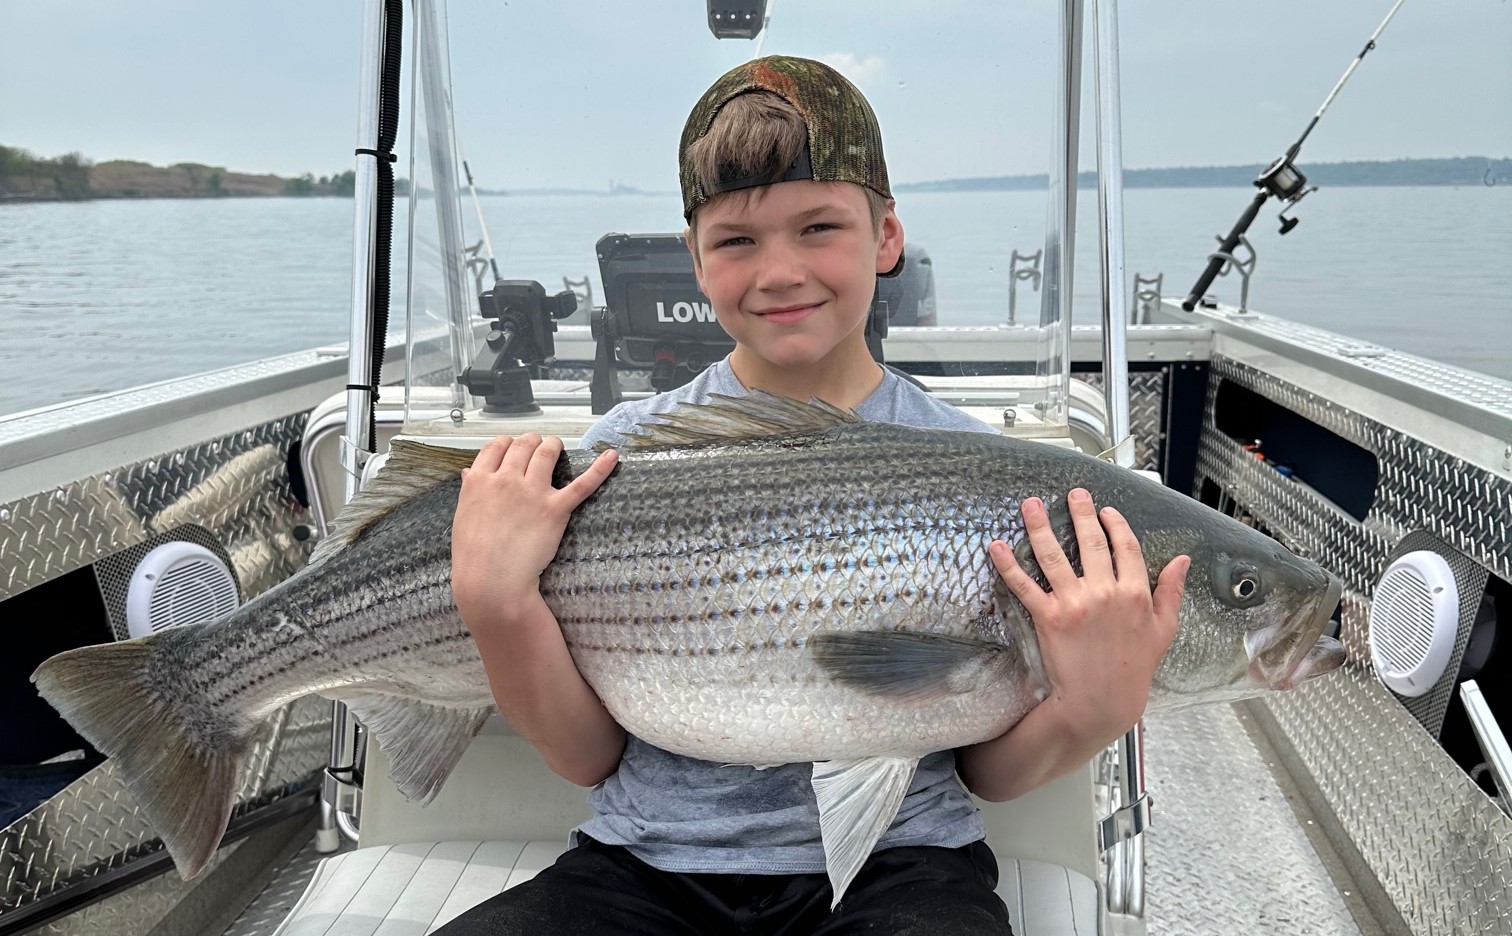 A smiling young angler sits on a boat on the water holding a large fish across his chest.